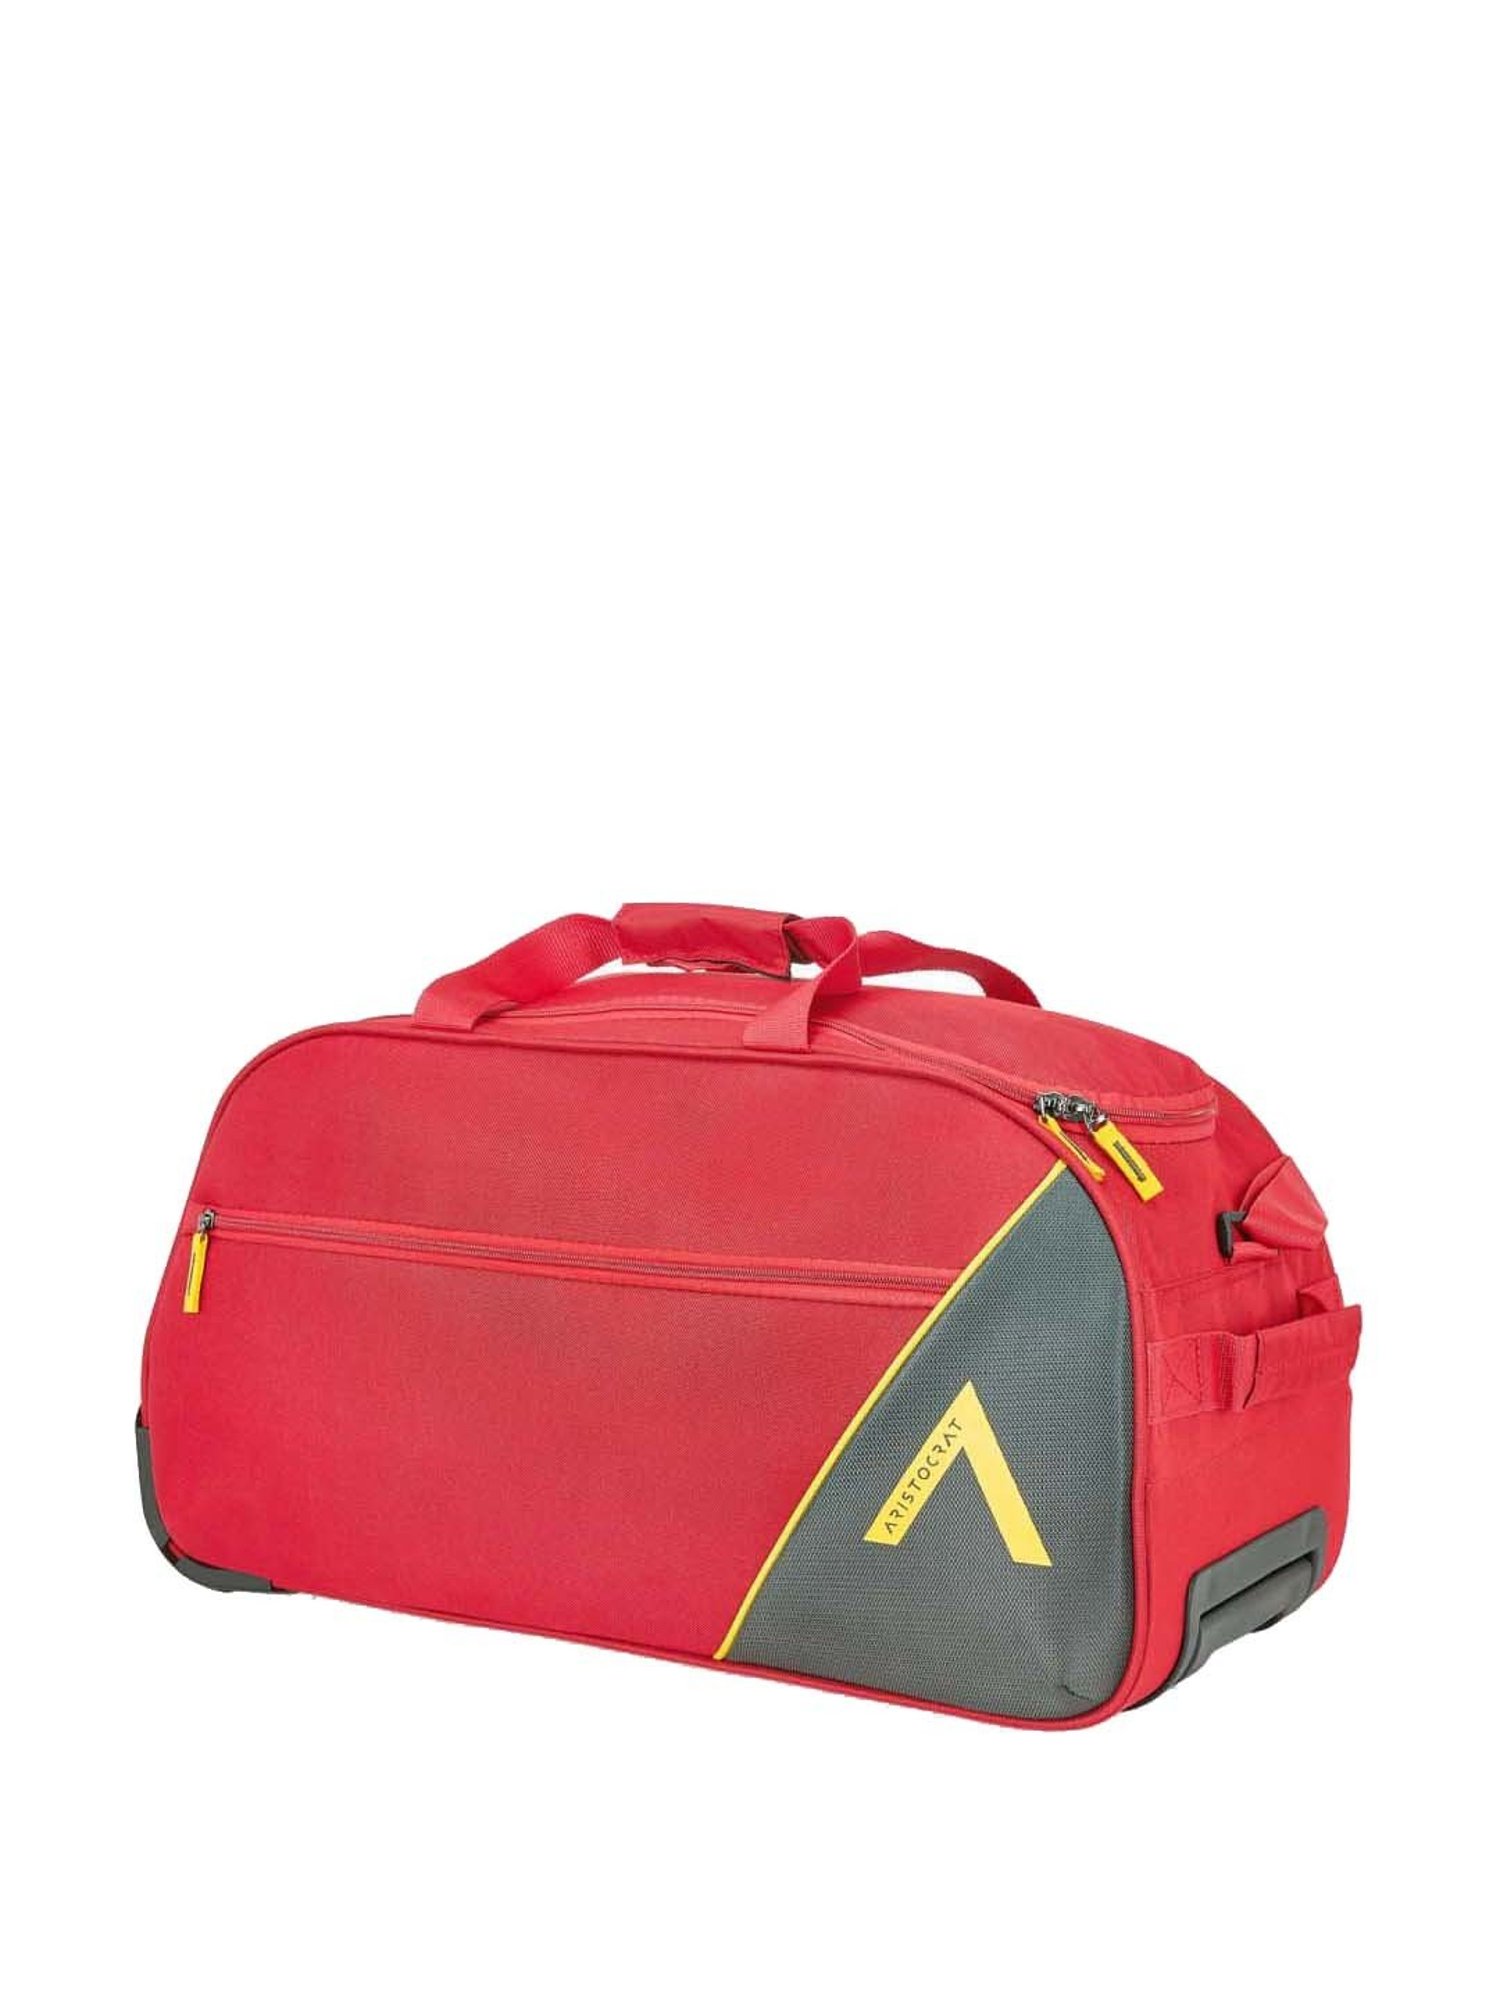 ARISTOCRAT ROOKIE DFT 52 (E) RED Duffel With Wheels (Strolley) Red - Price  in India | Flipkart.com